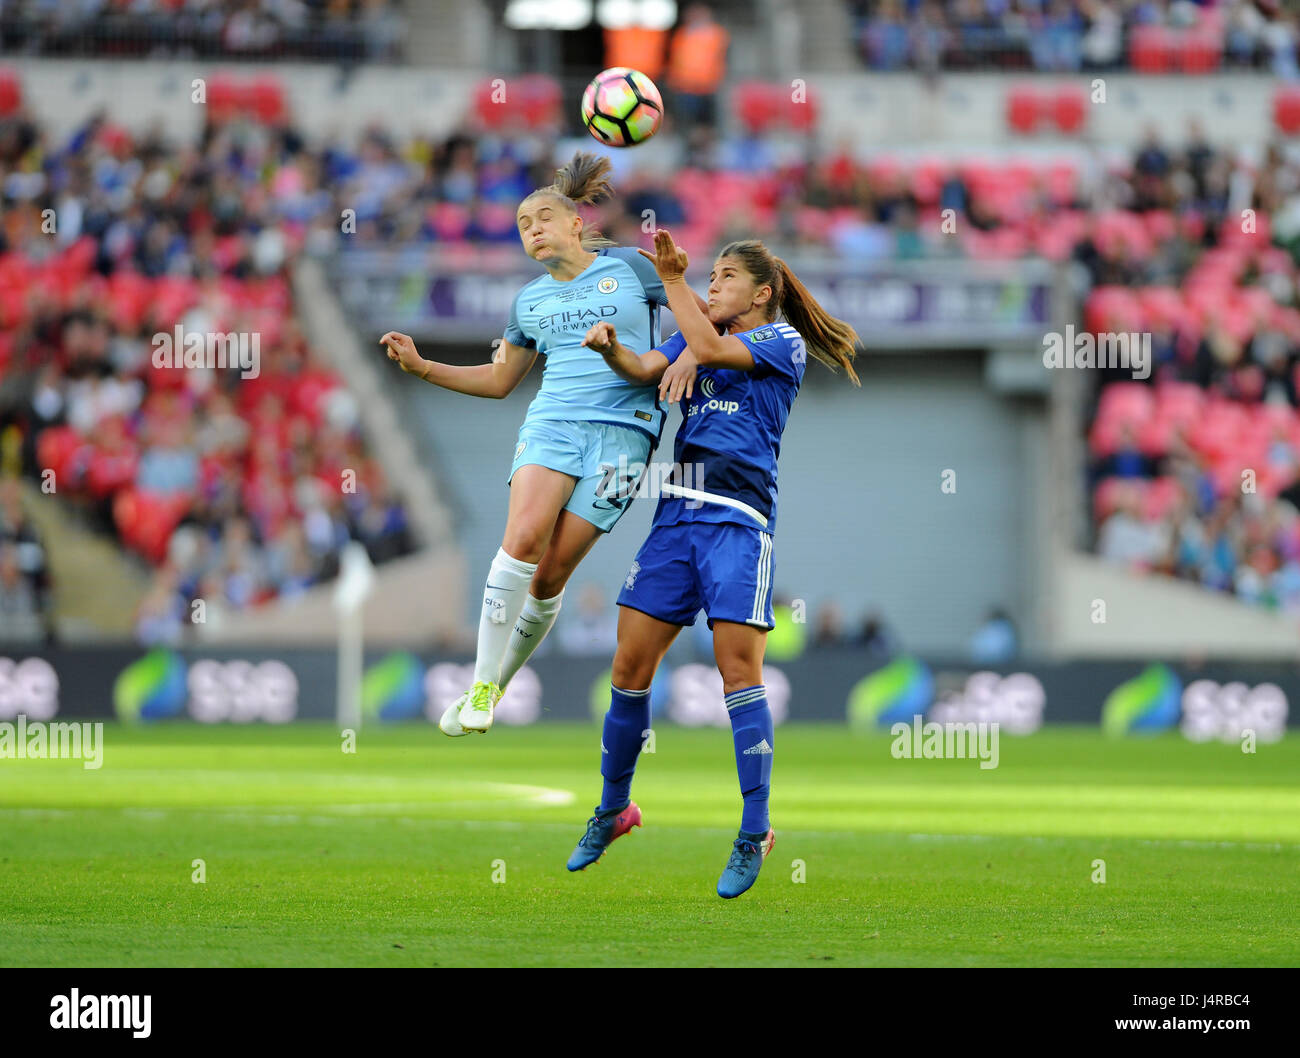 London, UK. May 13th 2017, Wembley Stadium, London, England; The SSE Womens FA Cup Final, Manchester City versus Birmingham City; Georgia Stanway (L) rises to challenge for the ball with Paige Williams (R) at Wembley Stadium. © David Partridge / Alamy Live News Stock Photo